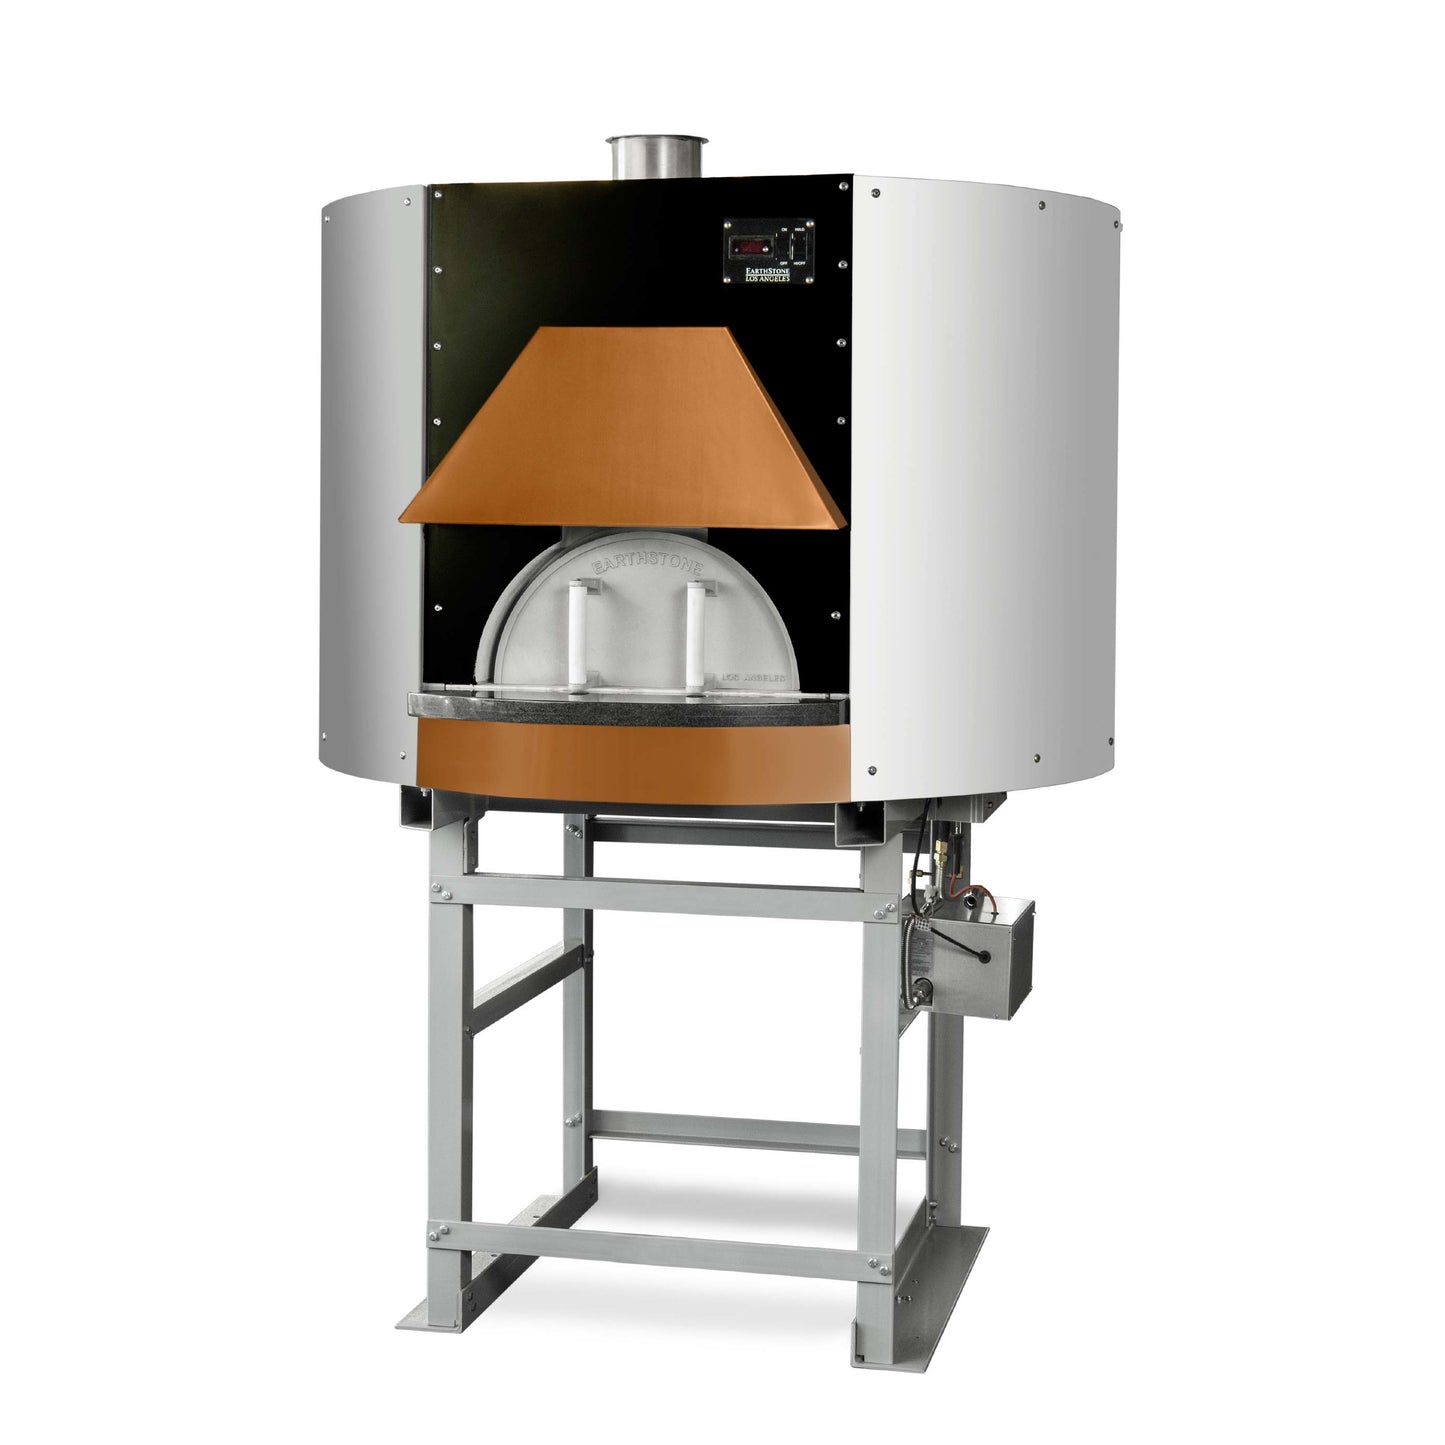 GAS/WOOD FIRED COMBINATION OVEN - Model 110-PAGW